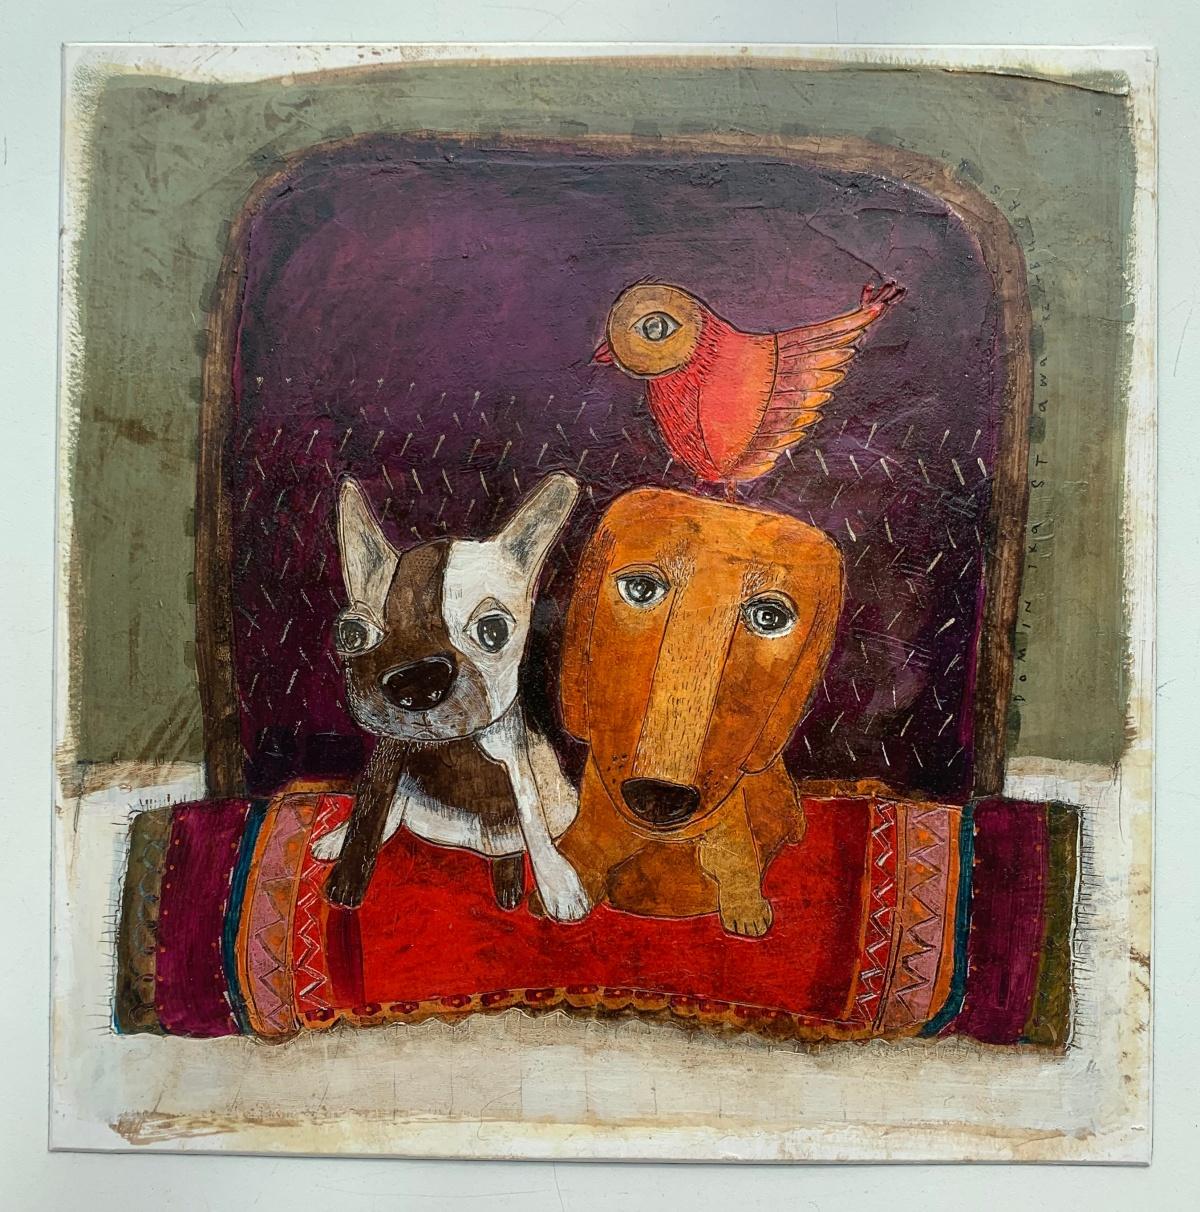 Contemporary figurative mixed media on cardboard painting by Polish artist Dominika Stawarz-Burska. Artwork has characteristical glossy finish to it which resembles surface of ceramic tile. Composition depicts two dogs sitting nearby each other with